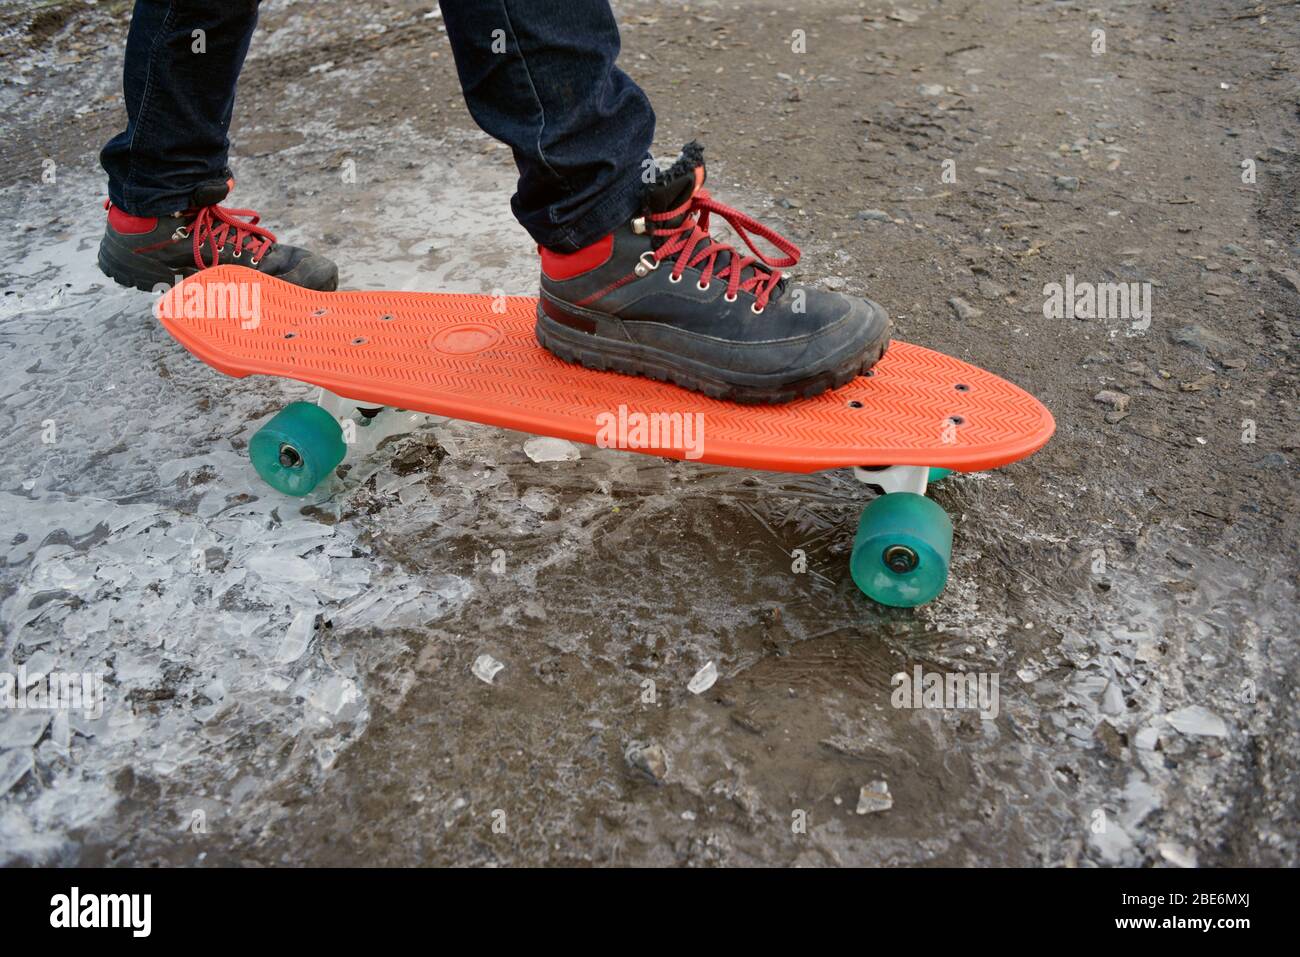 Skateboard on a frozen road with a kid Stock Photo - Alamy